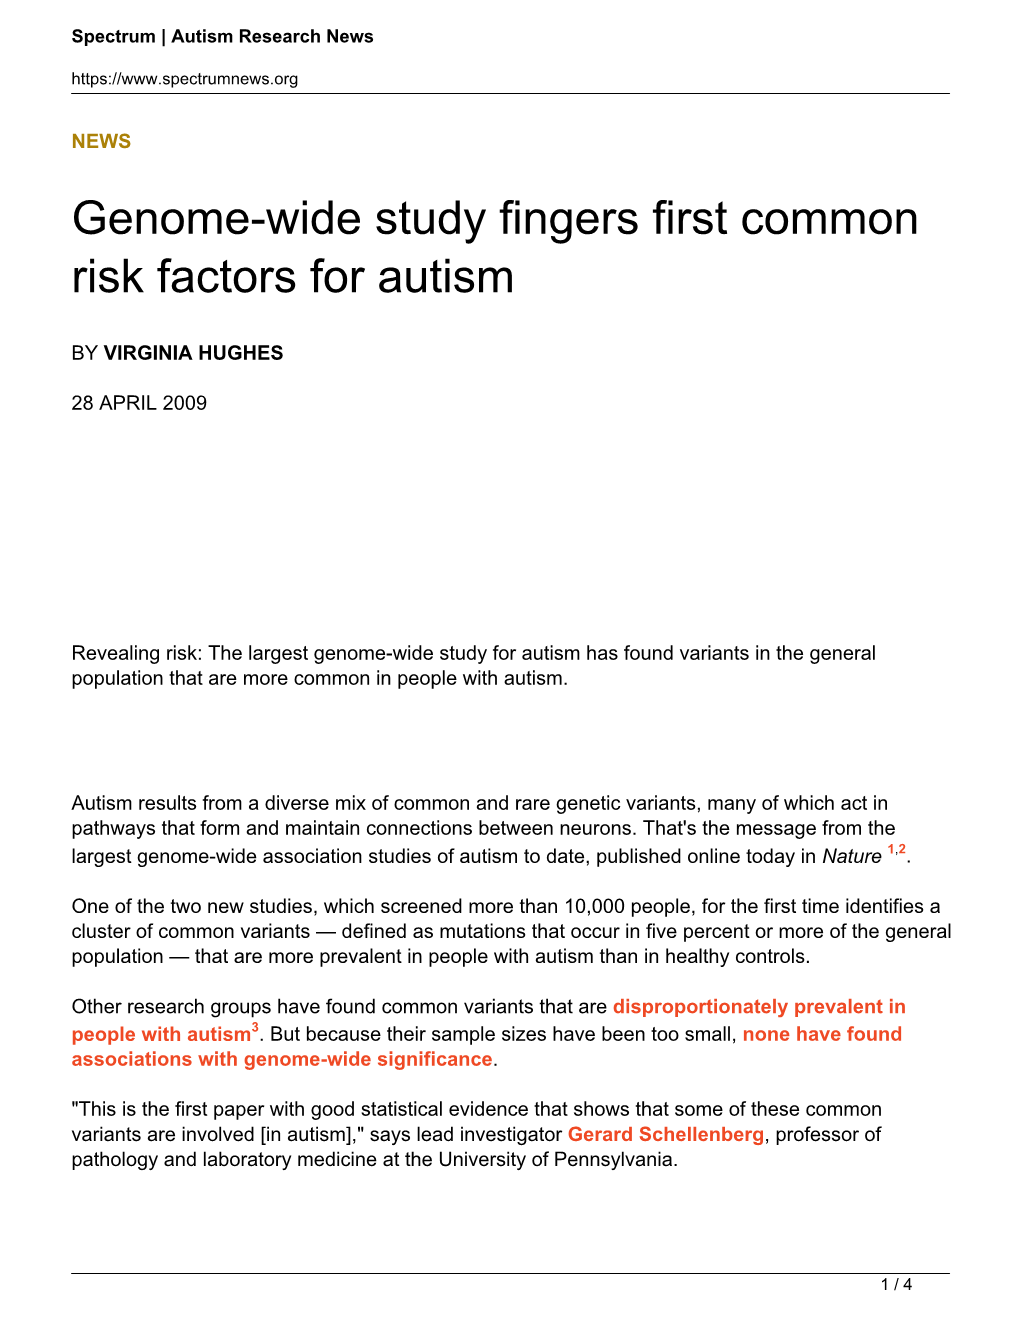 Genome-Wide Study Fingers First Common Risk Factors for Autism